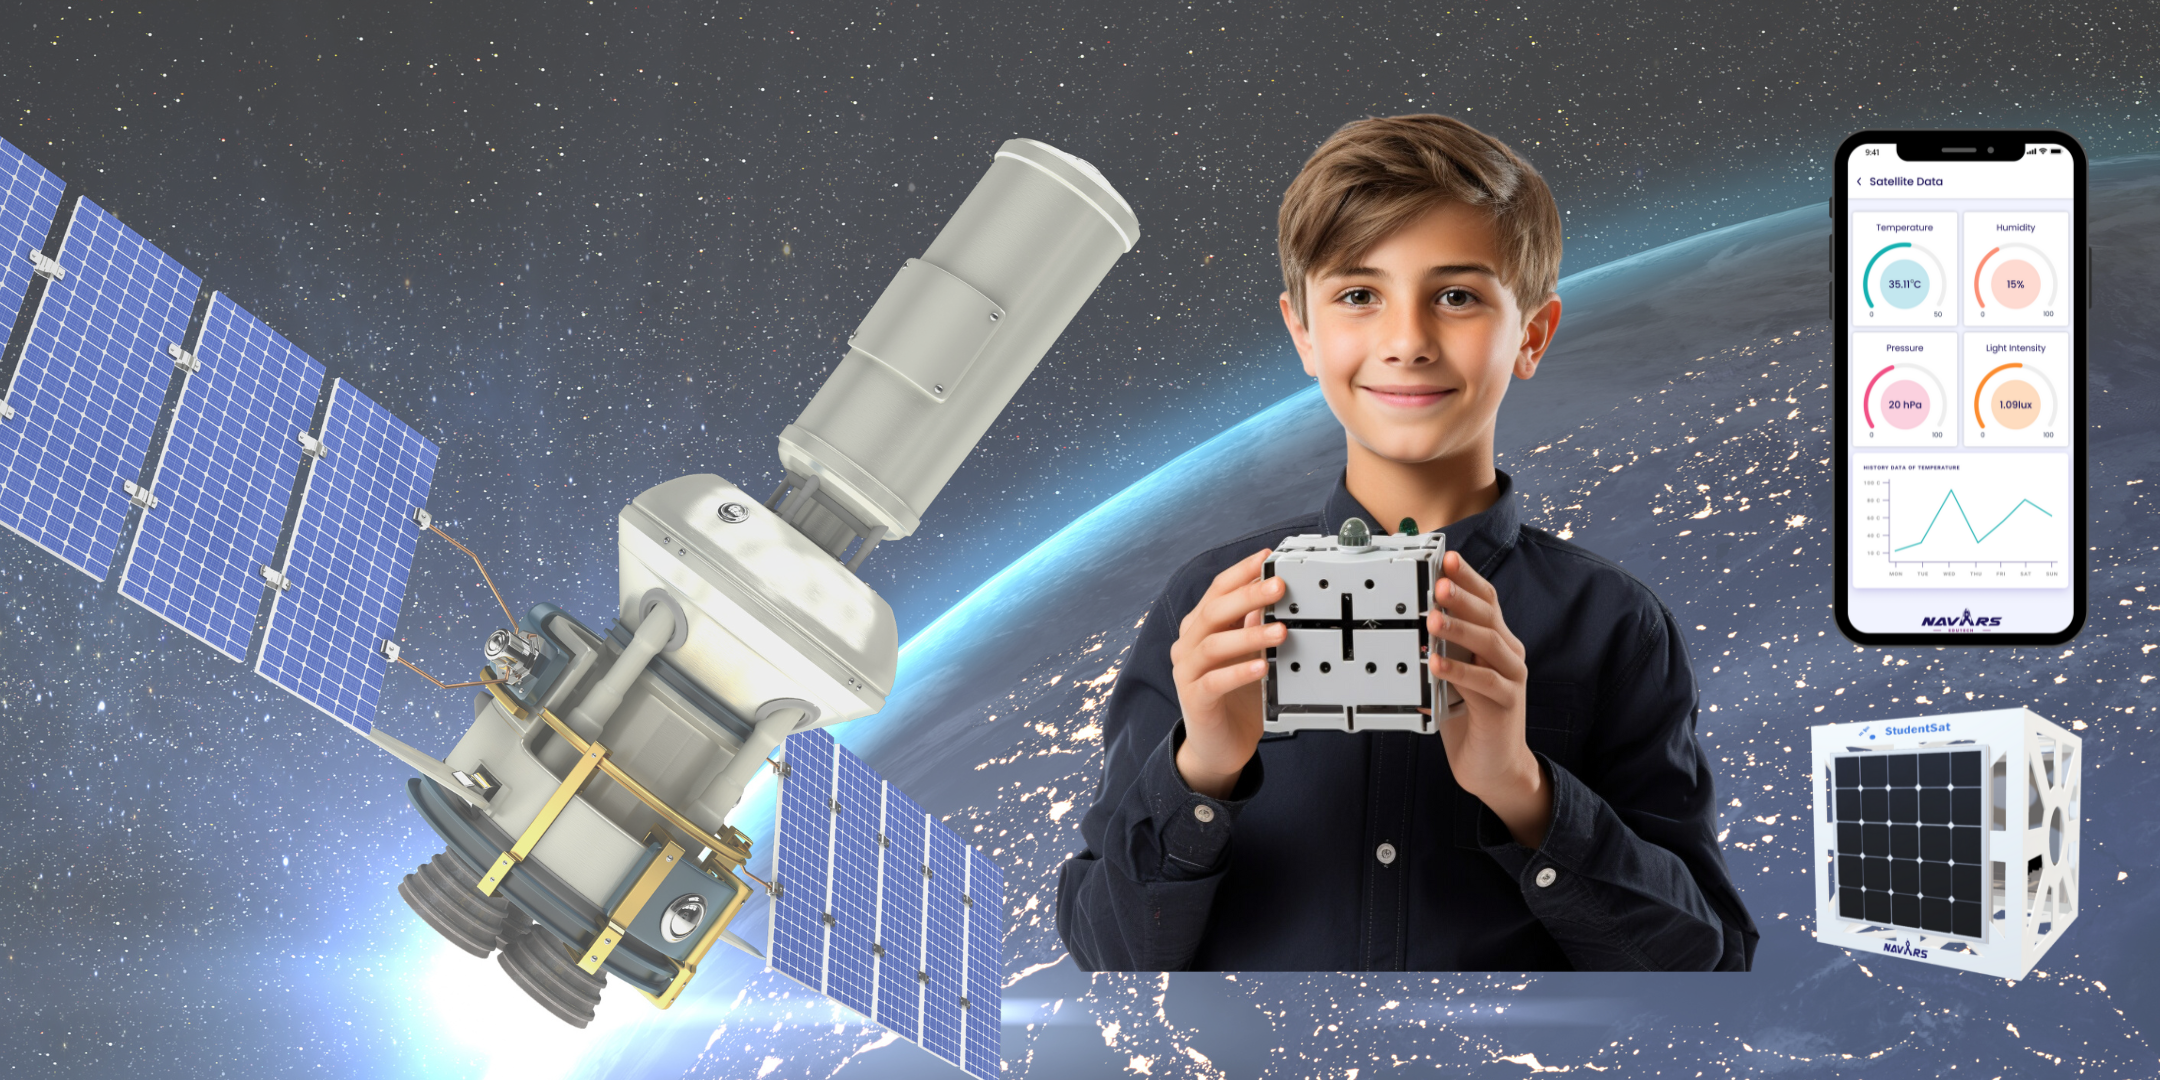 Build and Launch your Own Satellite